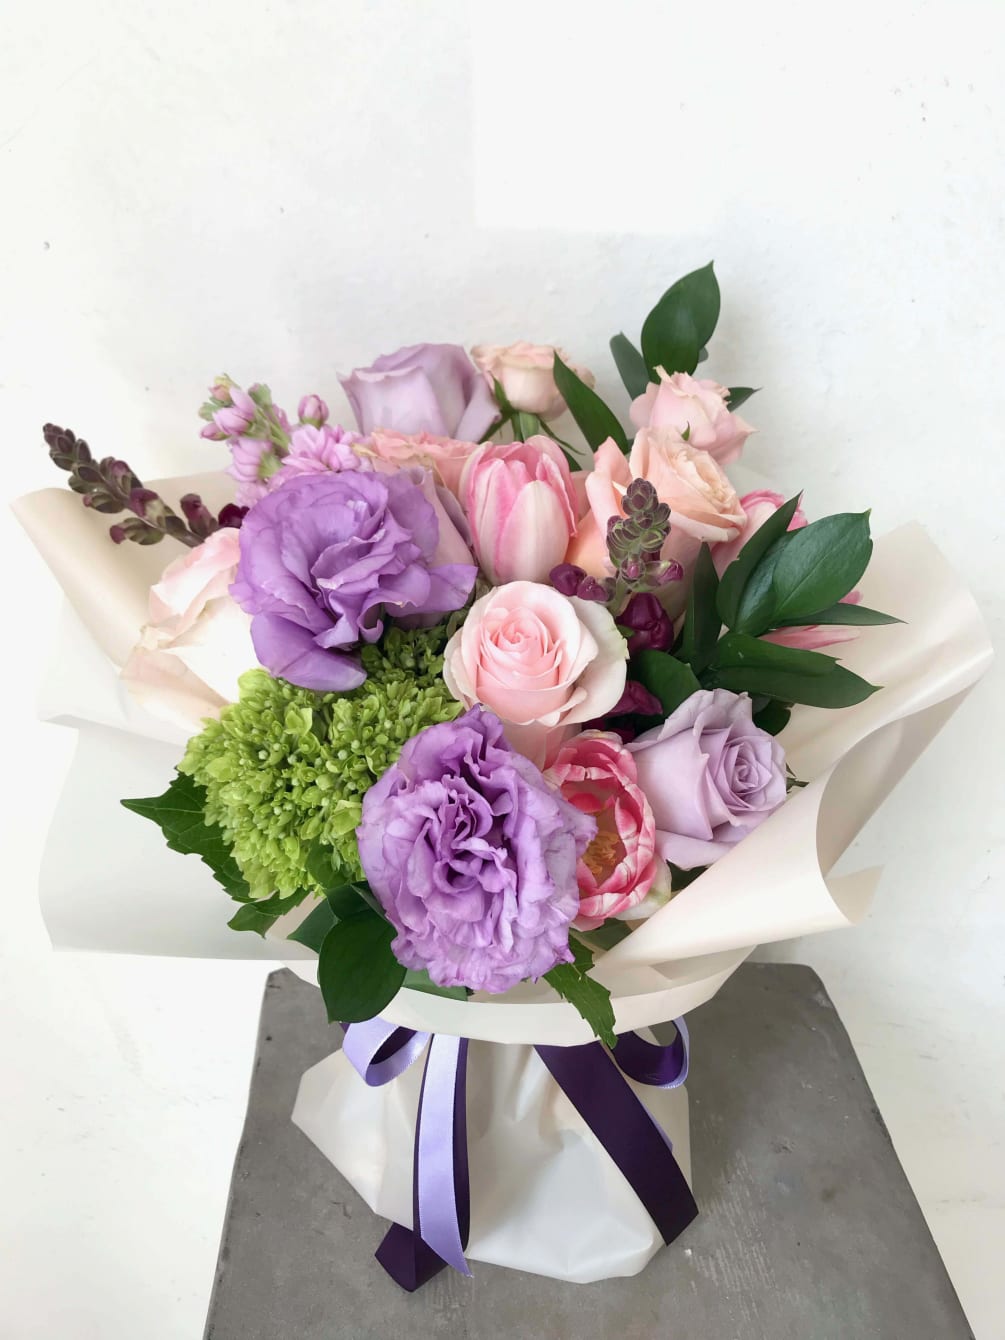 Mixed bouquet of pink Roses, lavender Lisanthus, lavender and peach roses, lavender